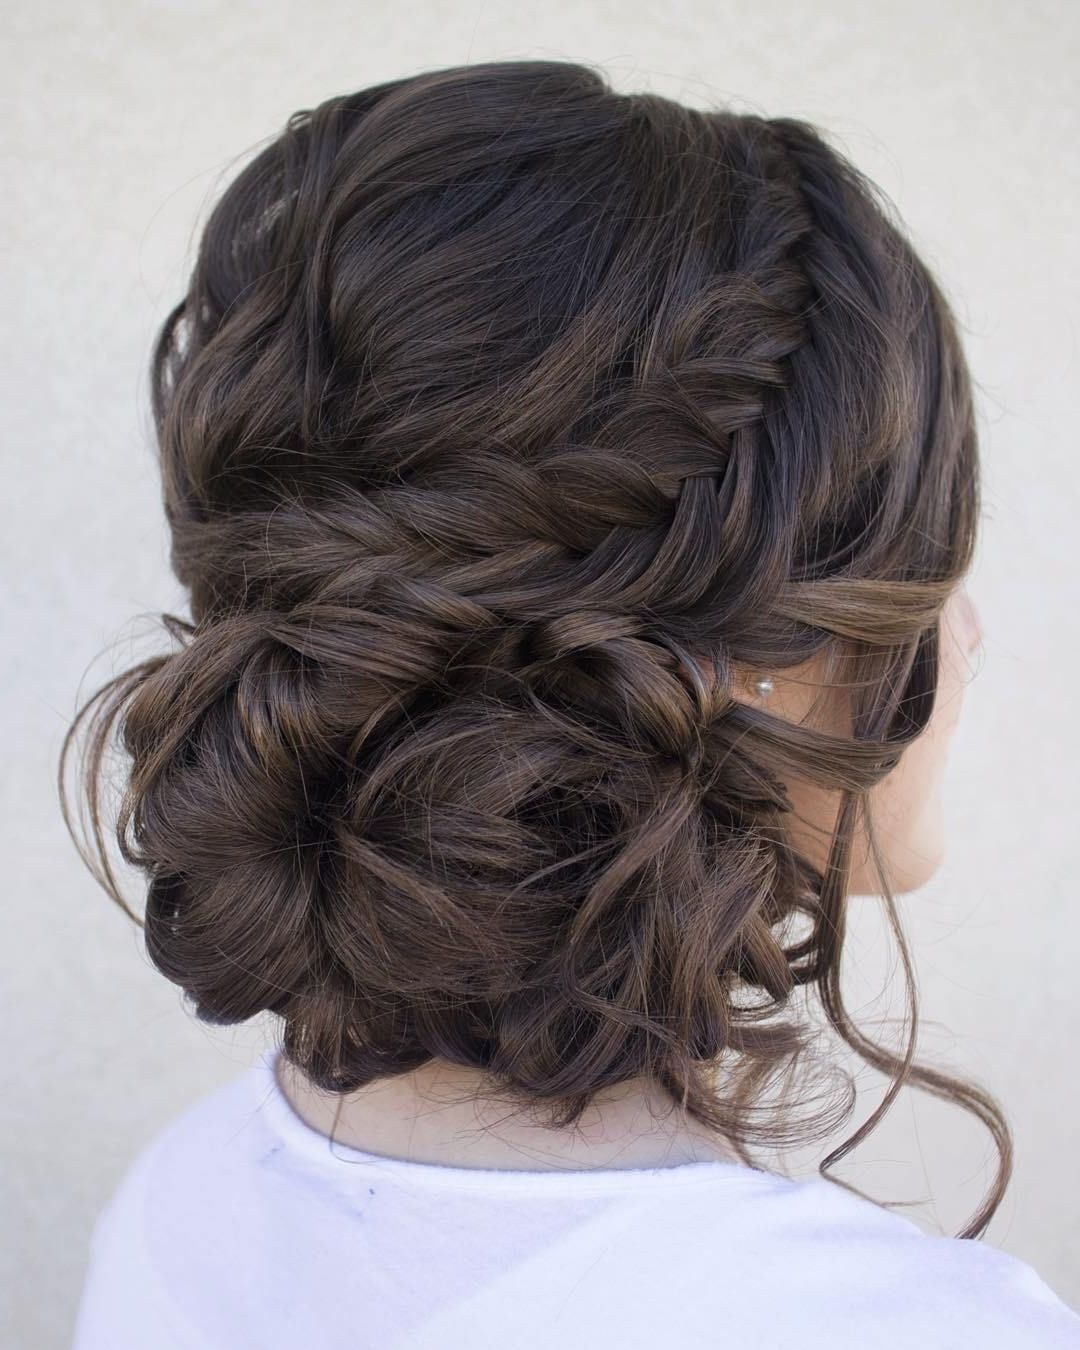 Hairstyles Intended For Popular Low Pearled Prom Updos (View 1 of 20)